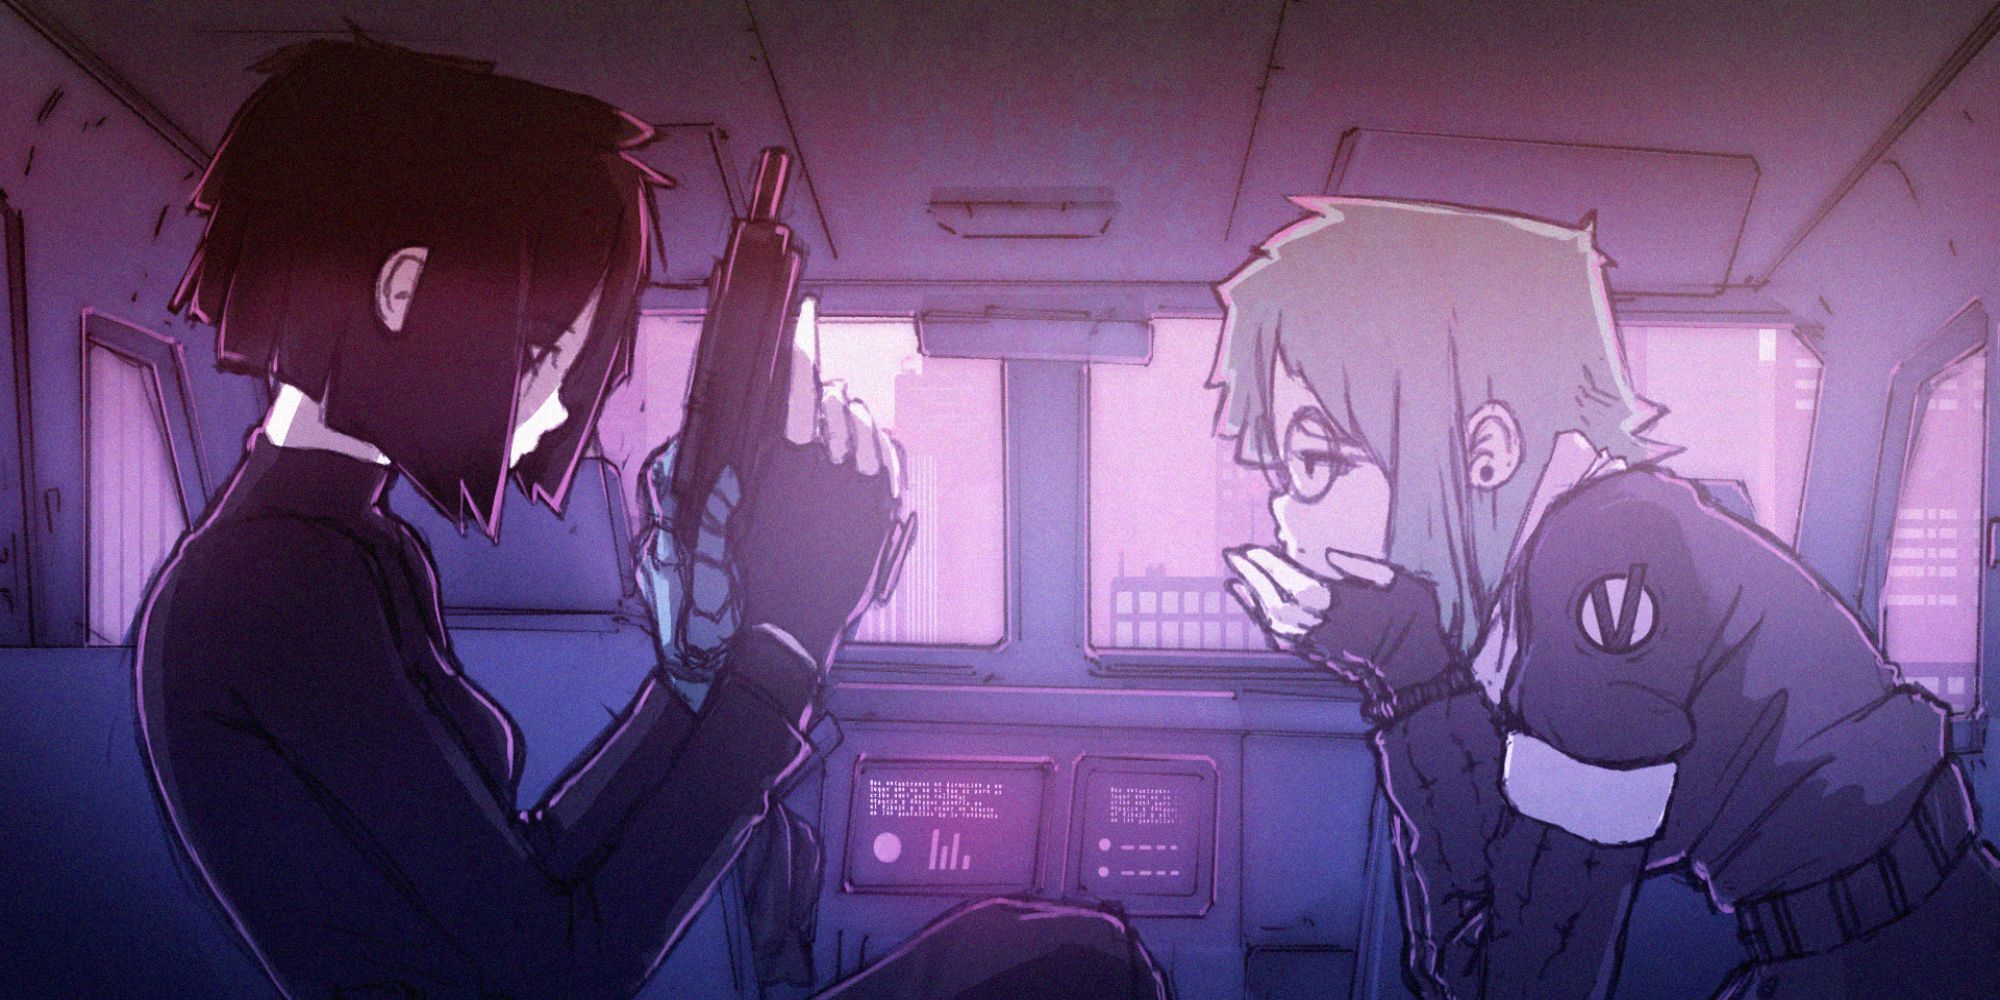 a shot from the visual novel Synergia featuring two of its characters, Cila and Darla, in the back of a truck with Cila loading a pistol